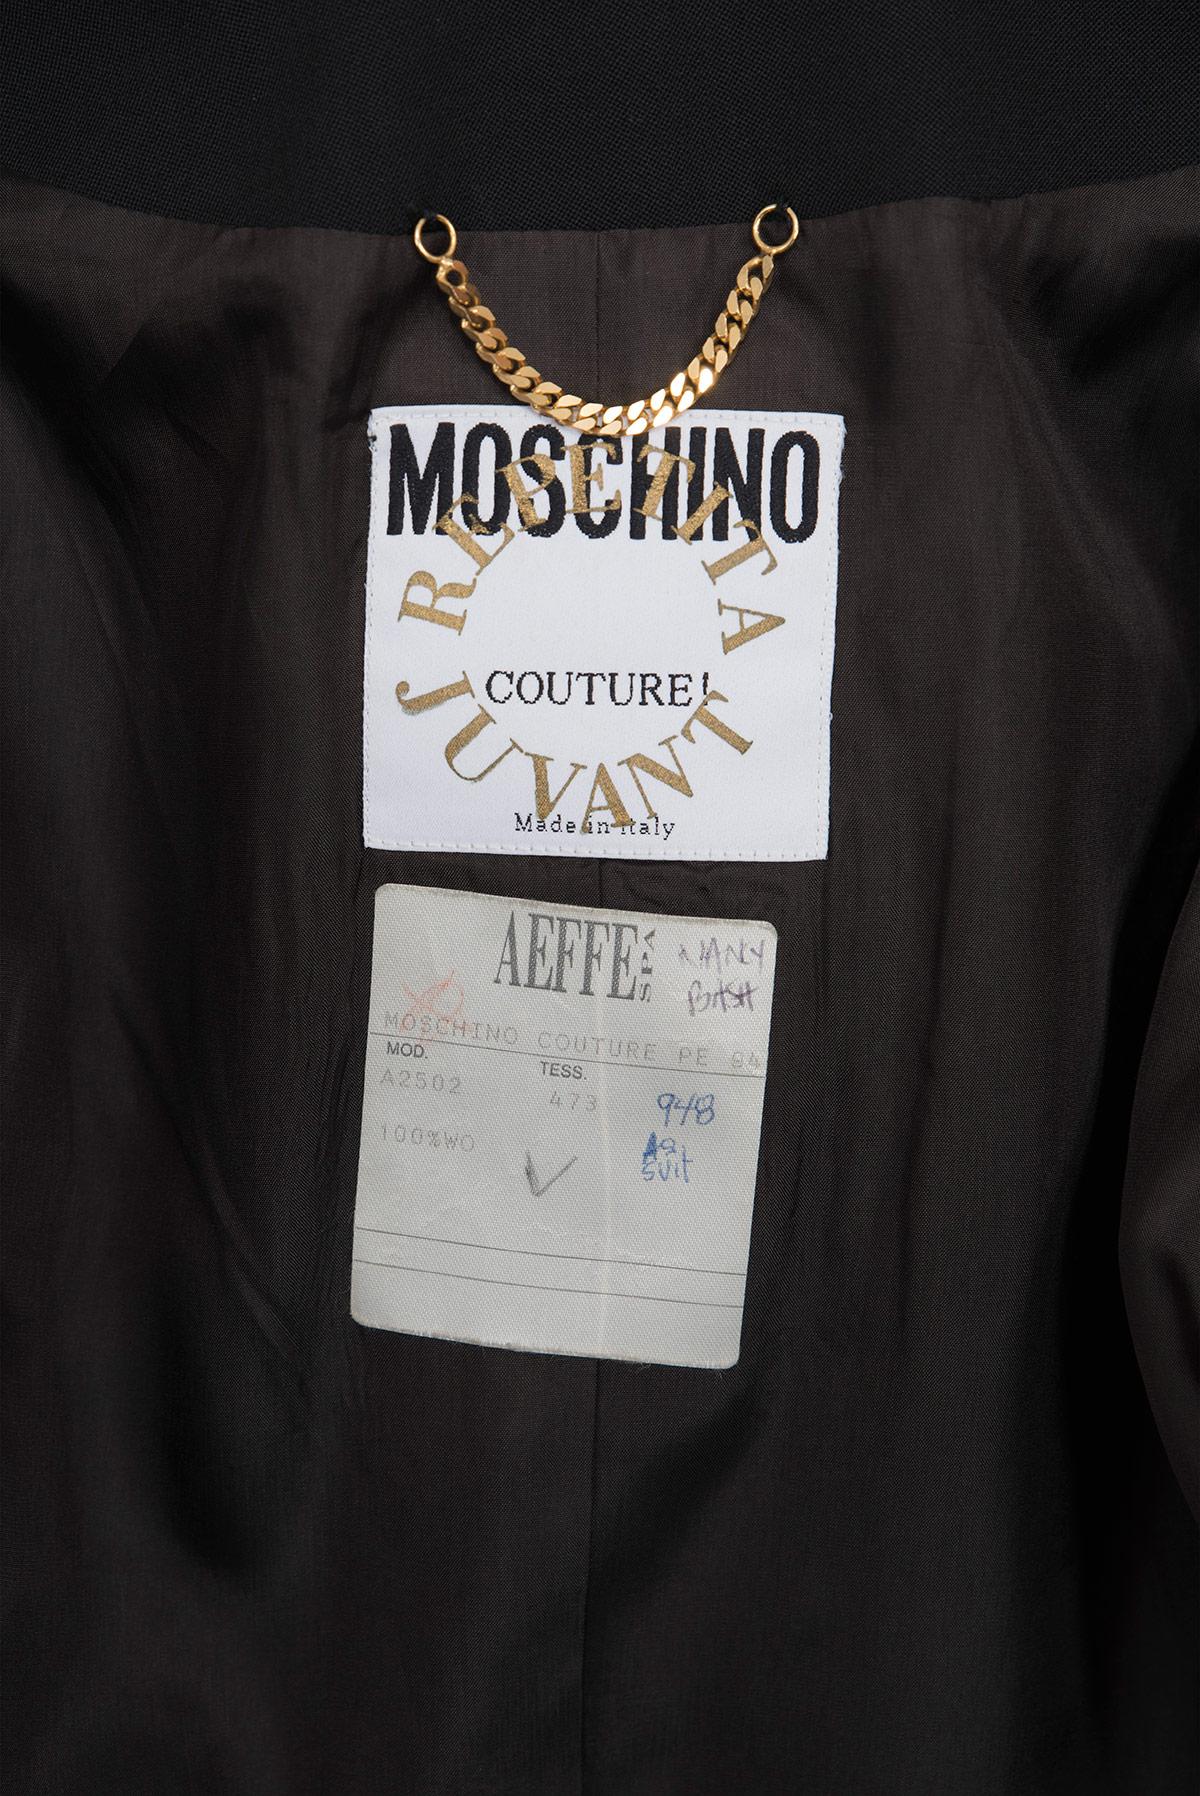 MOSCHINO SS 94 Iconic and Rare Cutlery Dinner Suit For Sale 1